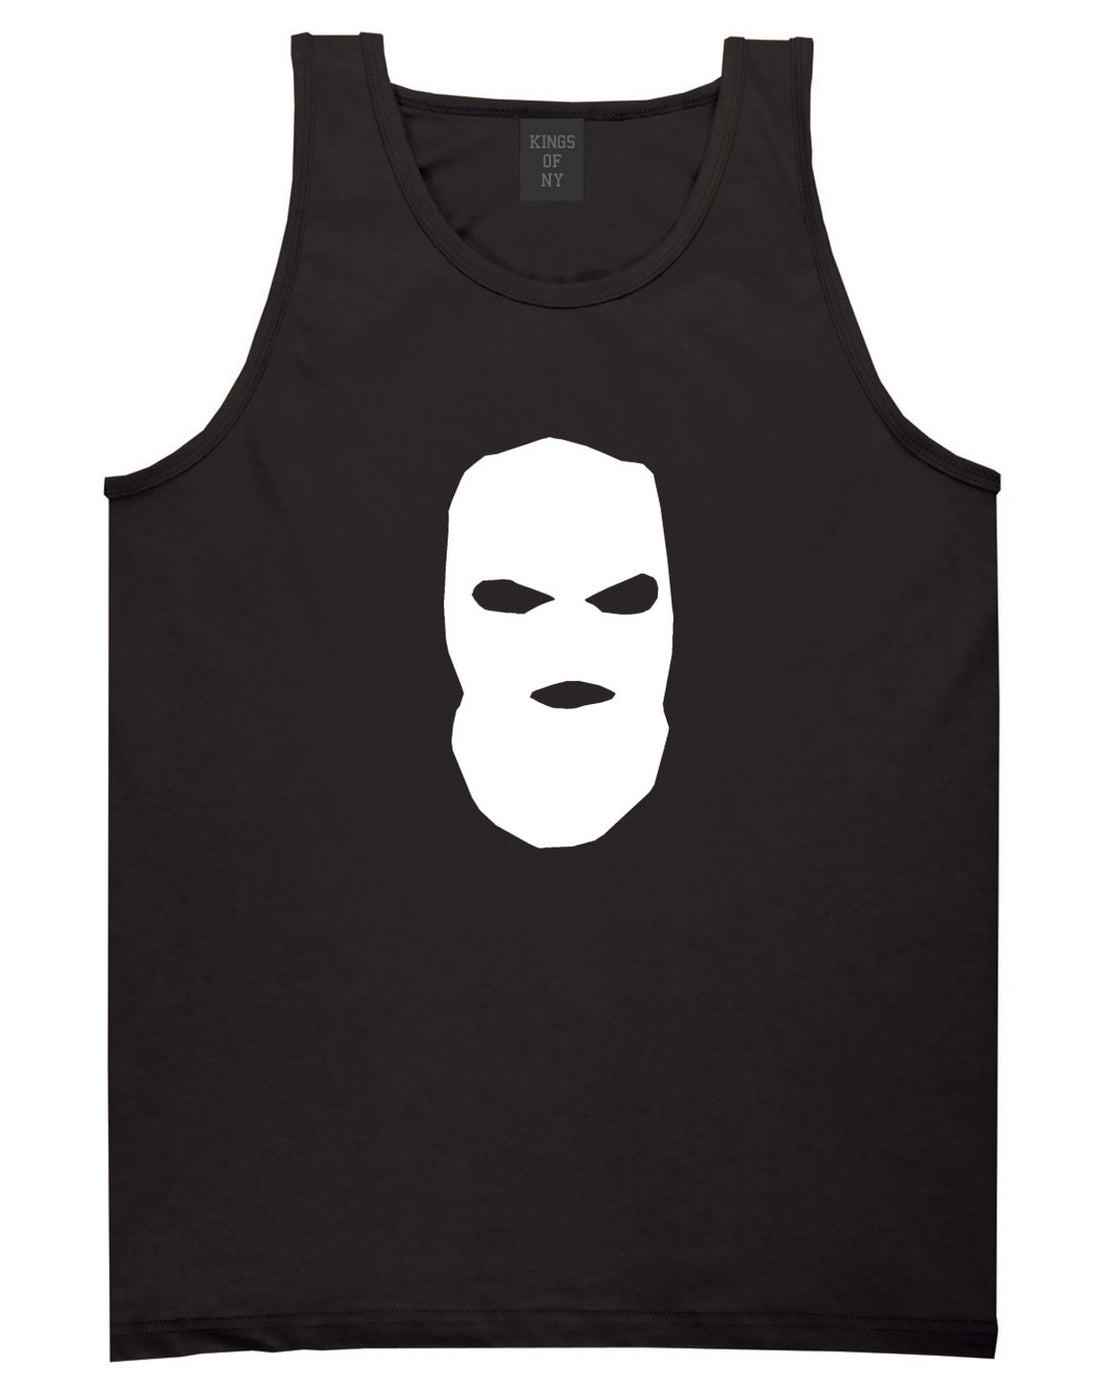 Ski Mask Way Robber Tank Top in Black By Kings Of NY